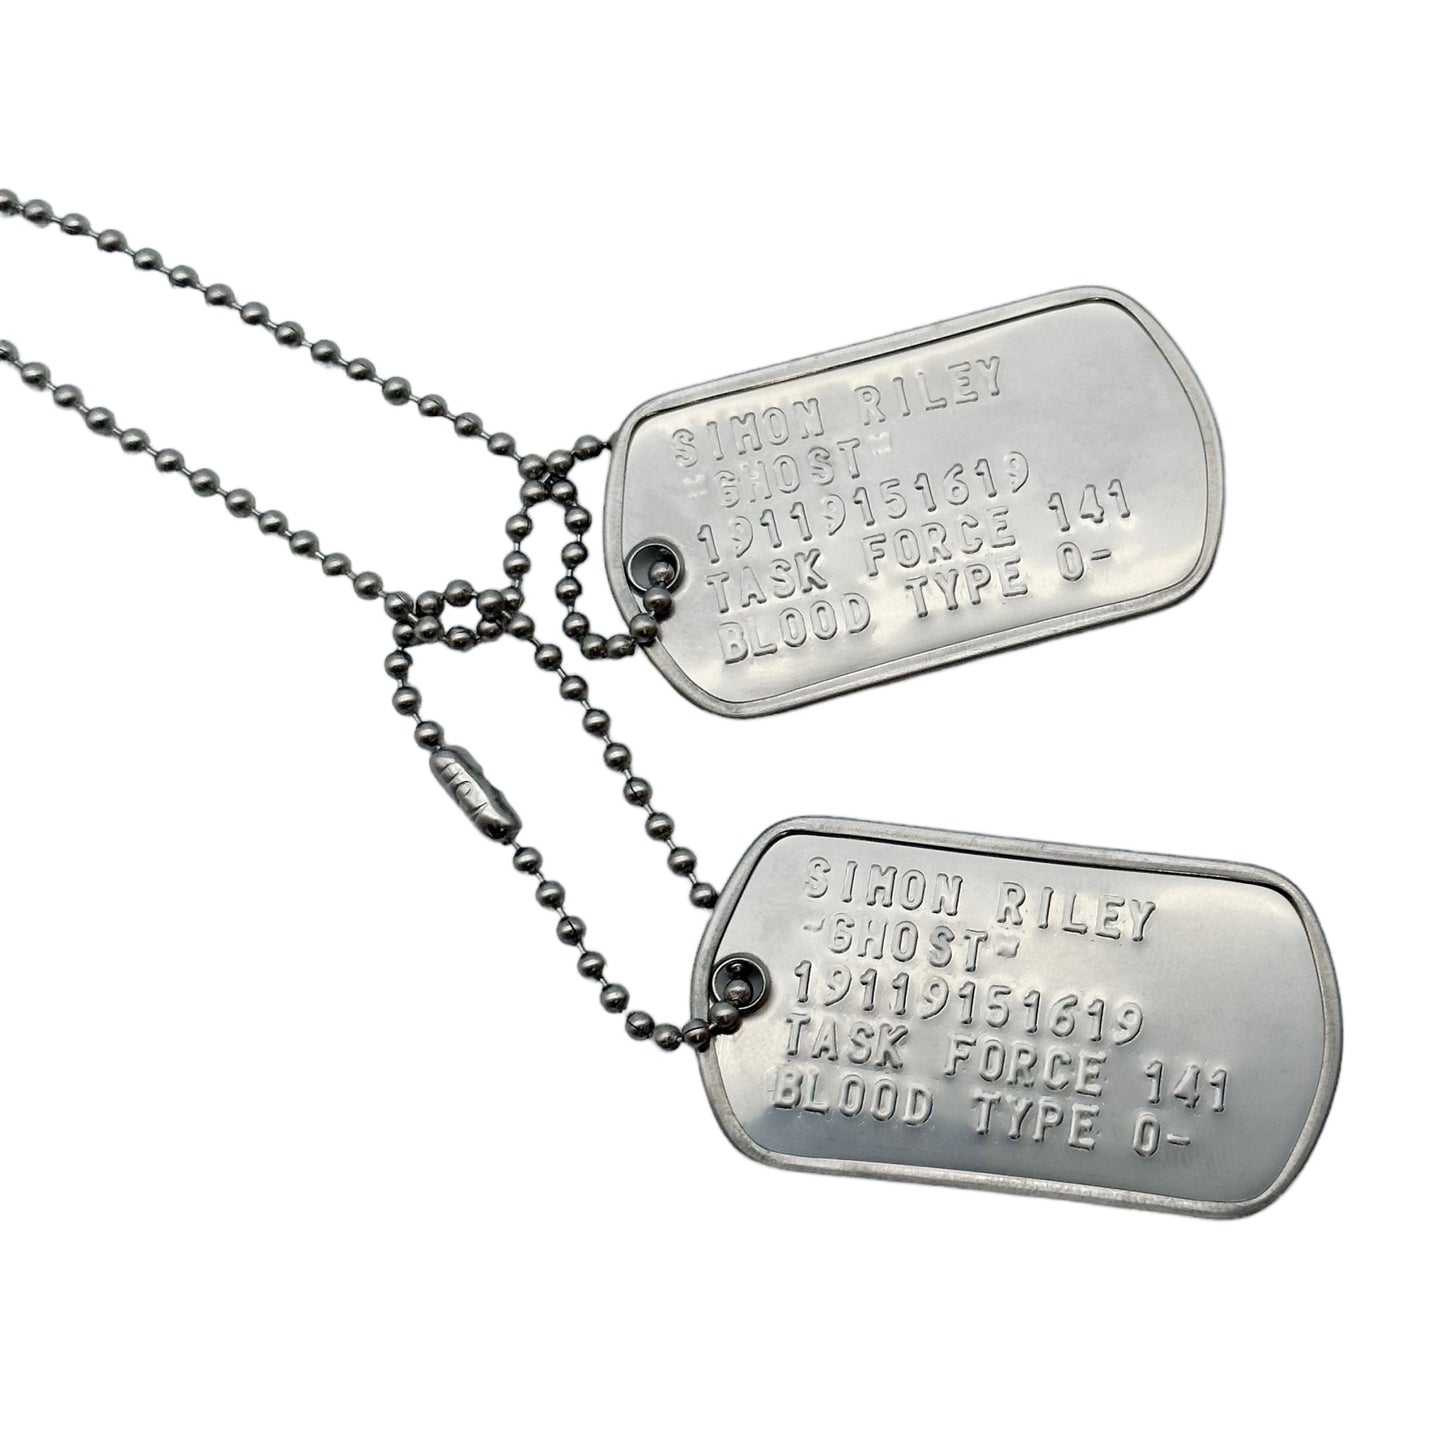 Simon 'Ghost' Riley US Military Dog Tags - Detailed Replica Collector Inspired Set - TheDogTagCo